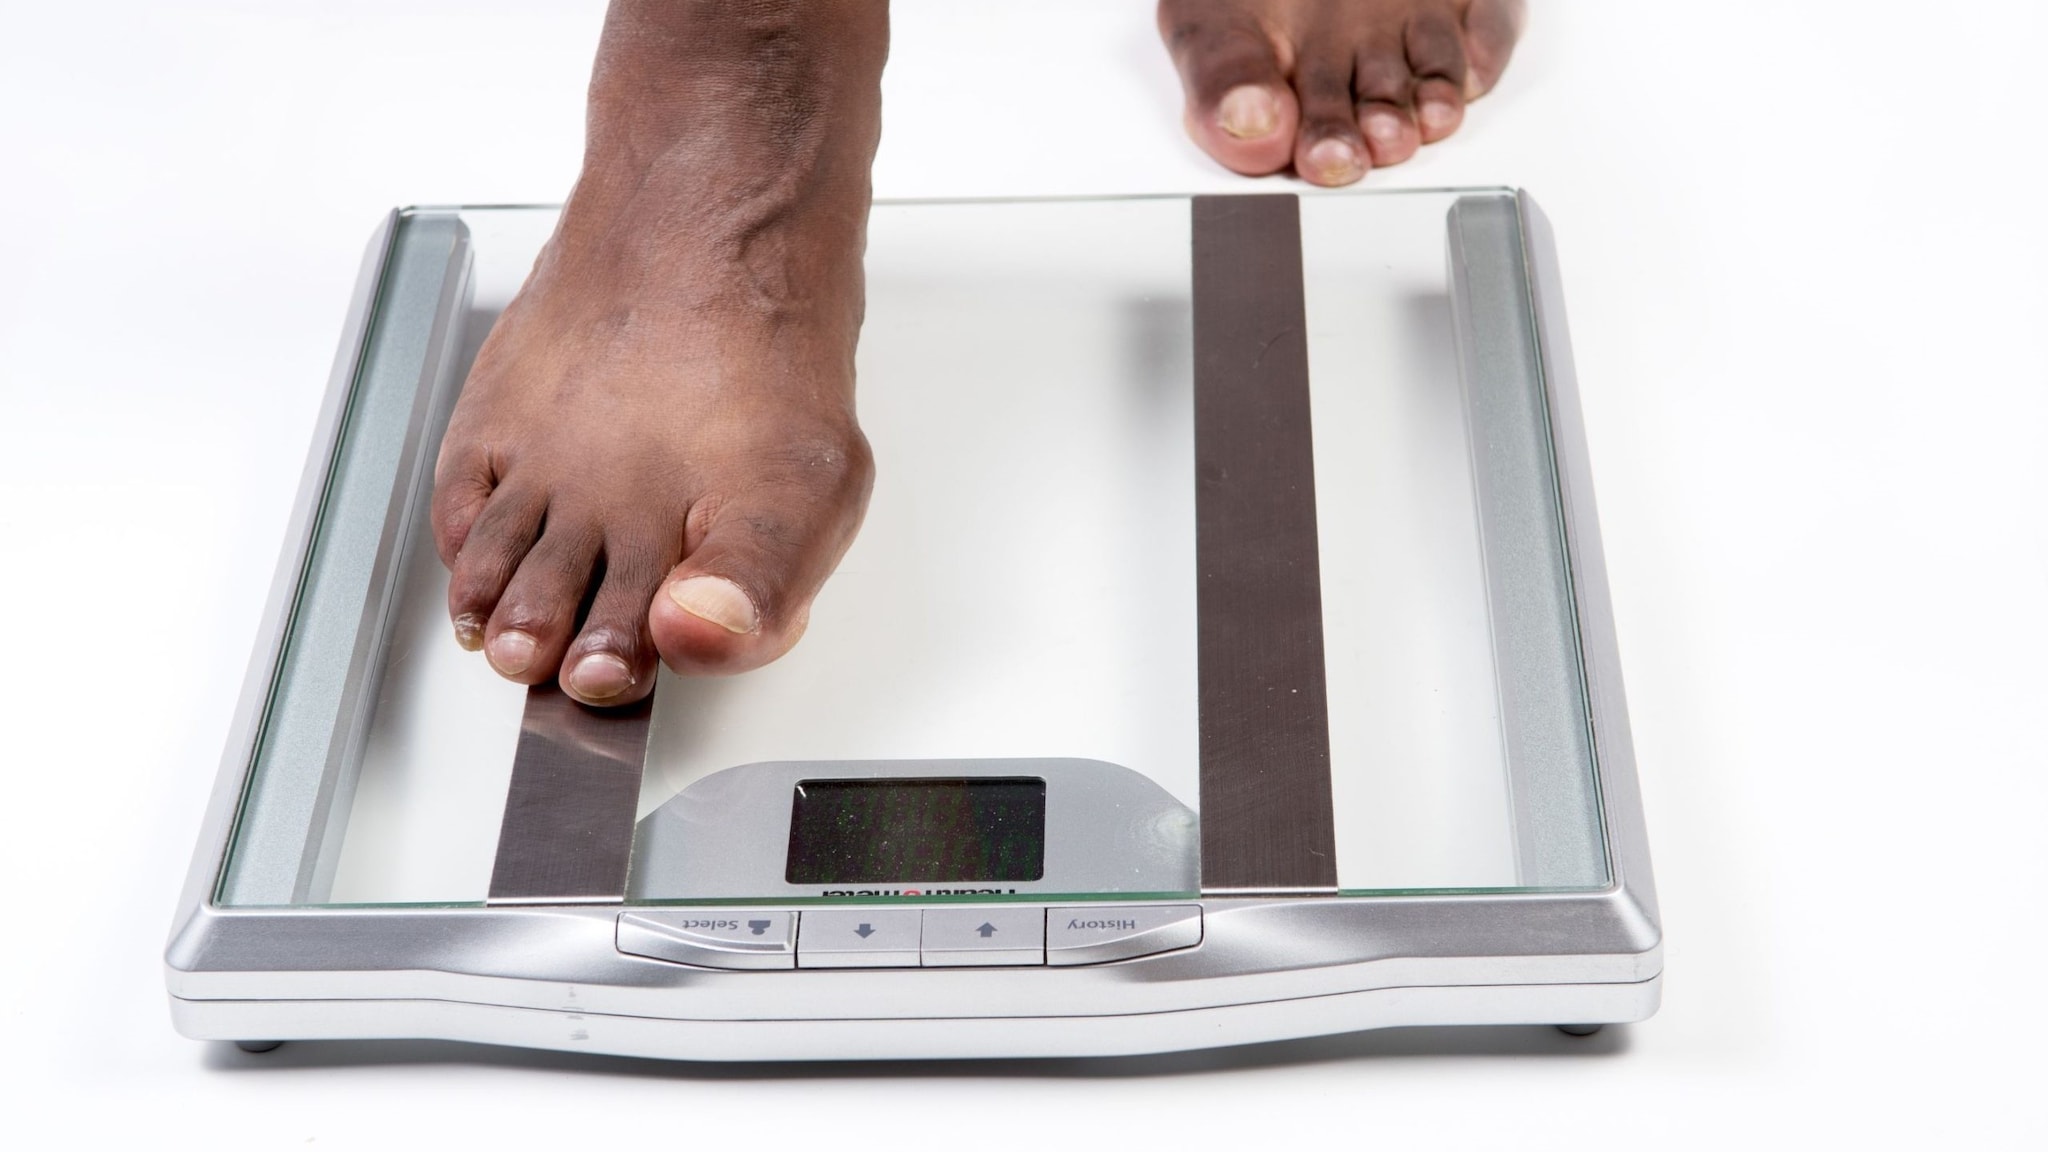 African American male feet stepping on electronic scales.